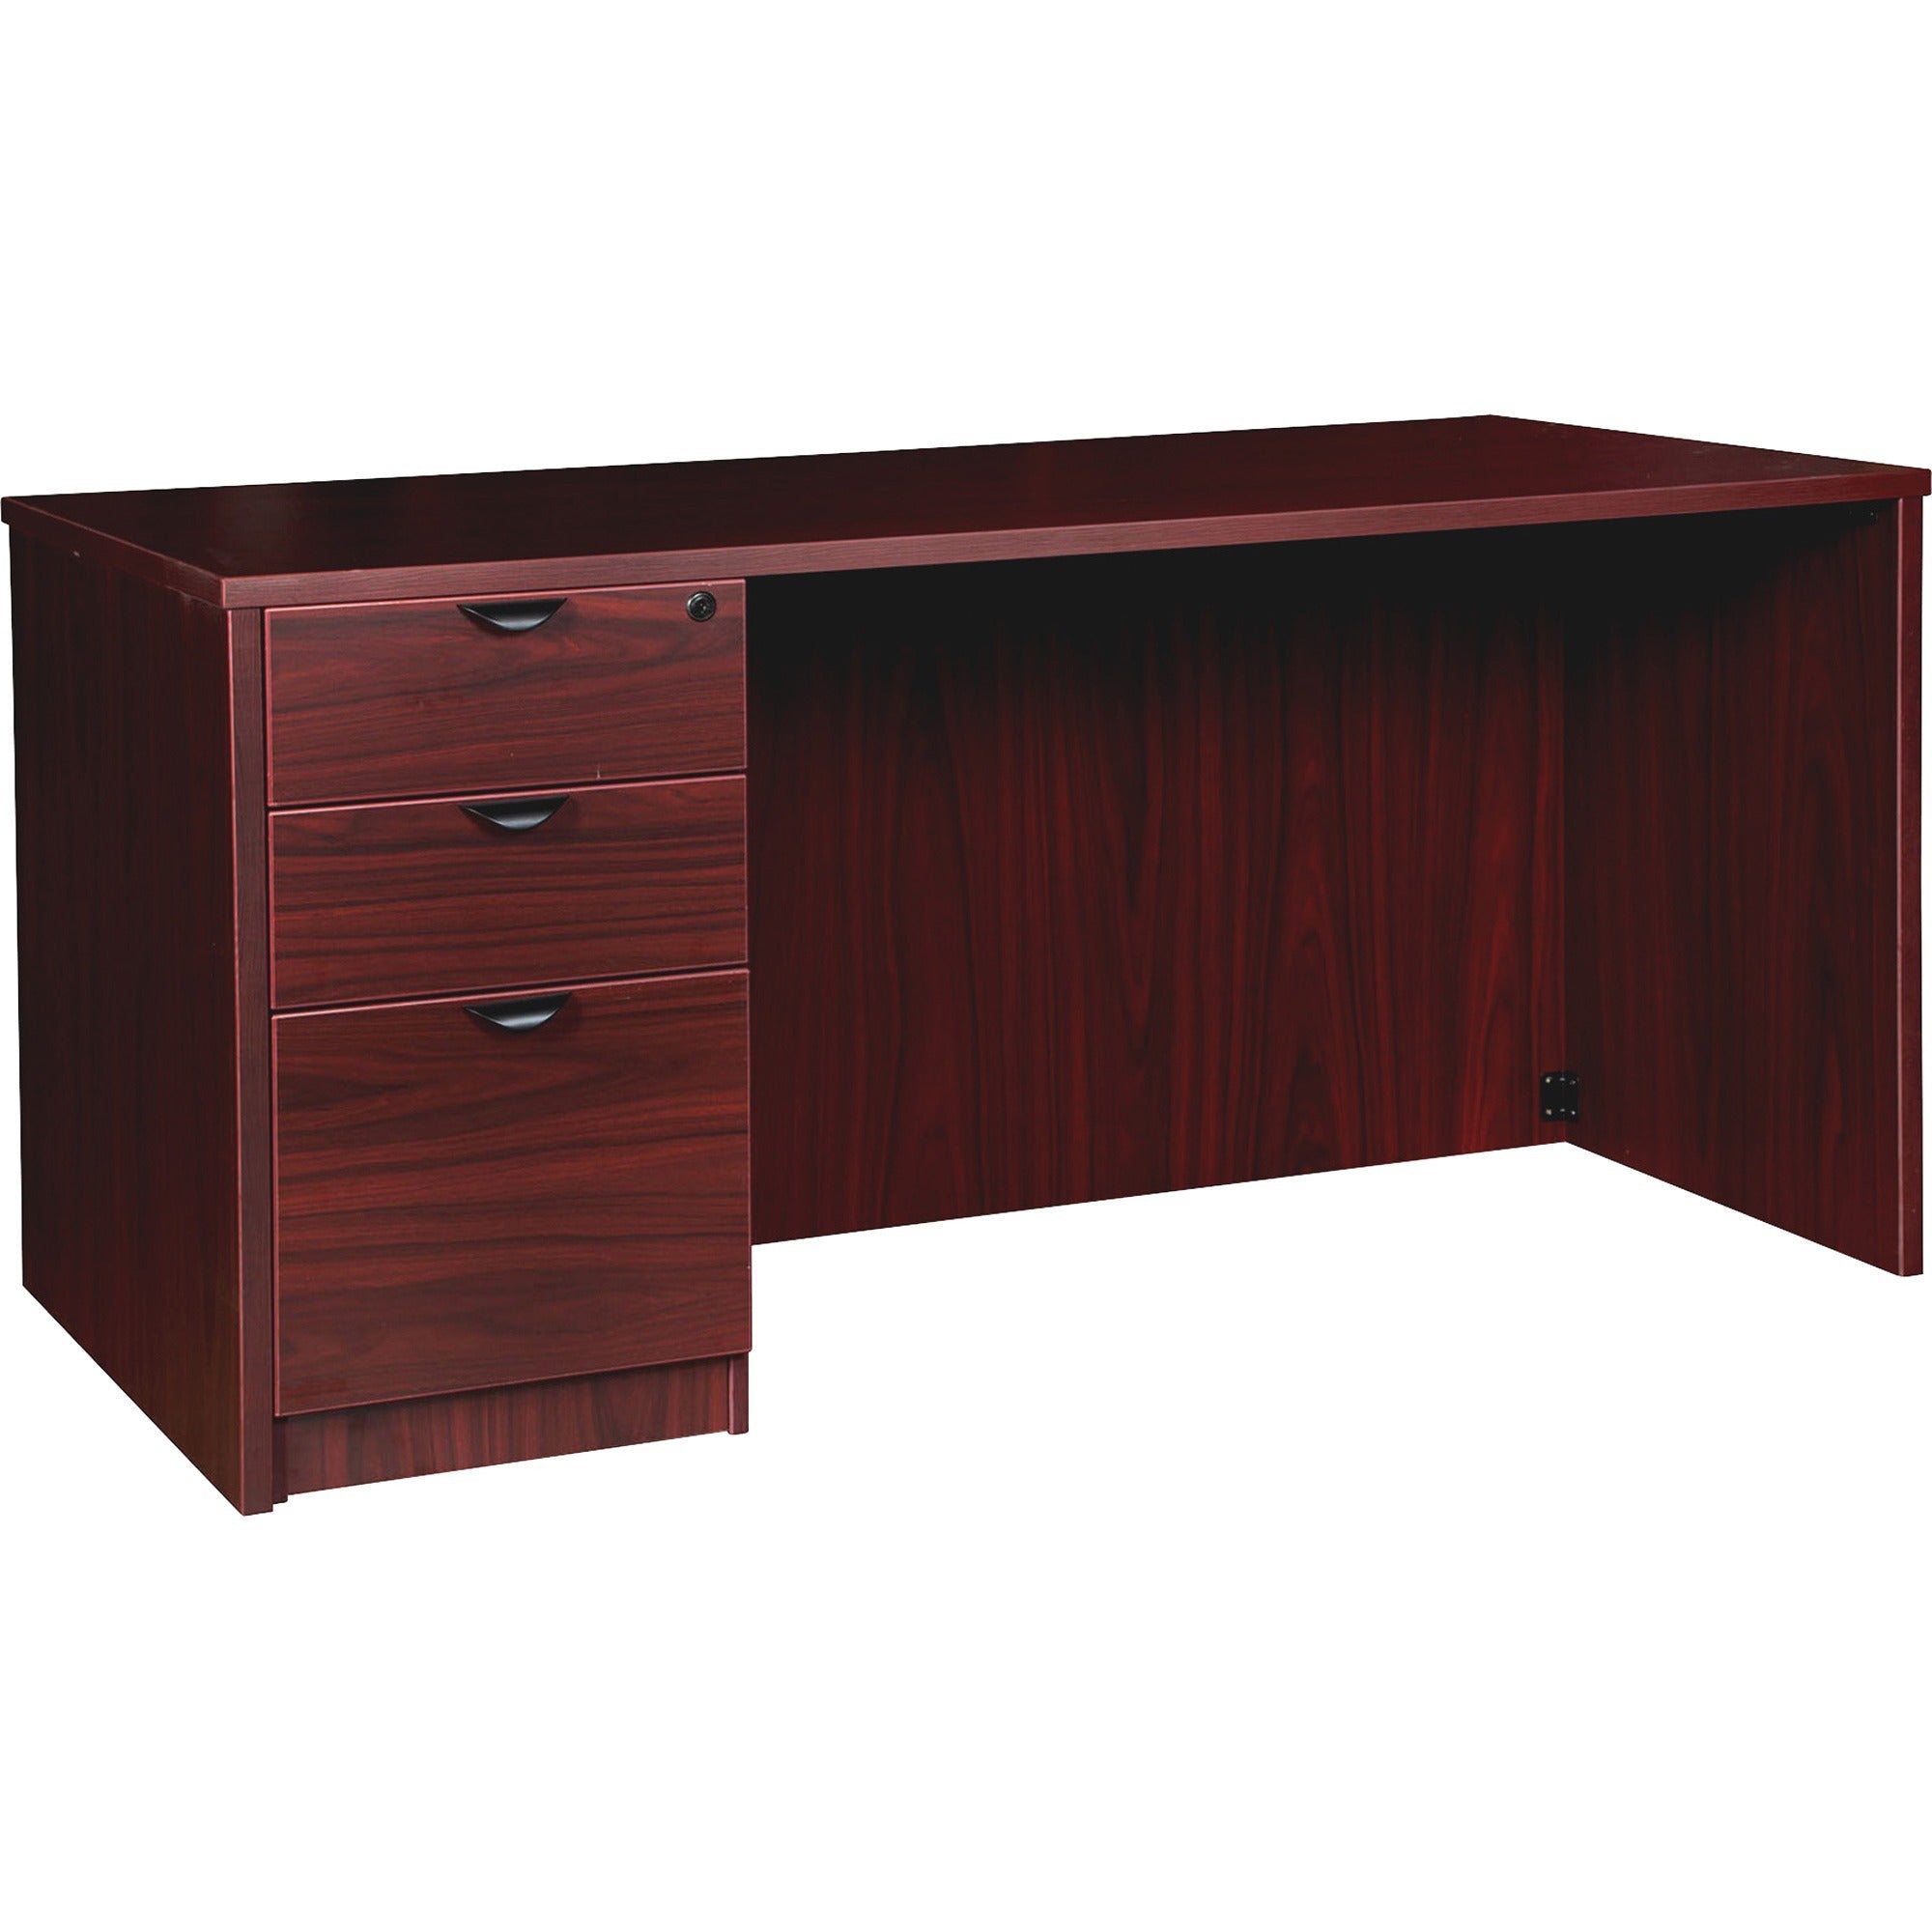 lorell-prominence-20-left-pedestal-desk-1-top-66-x-3029-3-x-file-box-drawers-single-pedestal-on-left-side-band-edge-material-particleboard-finish-mahogany-laminate-thermofused-melamine-tfm_llrpd3066lspmy - 1